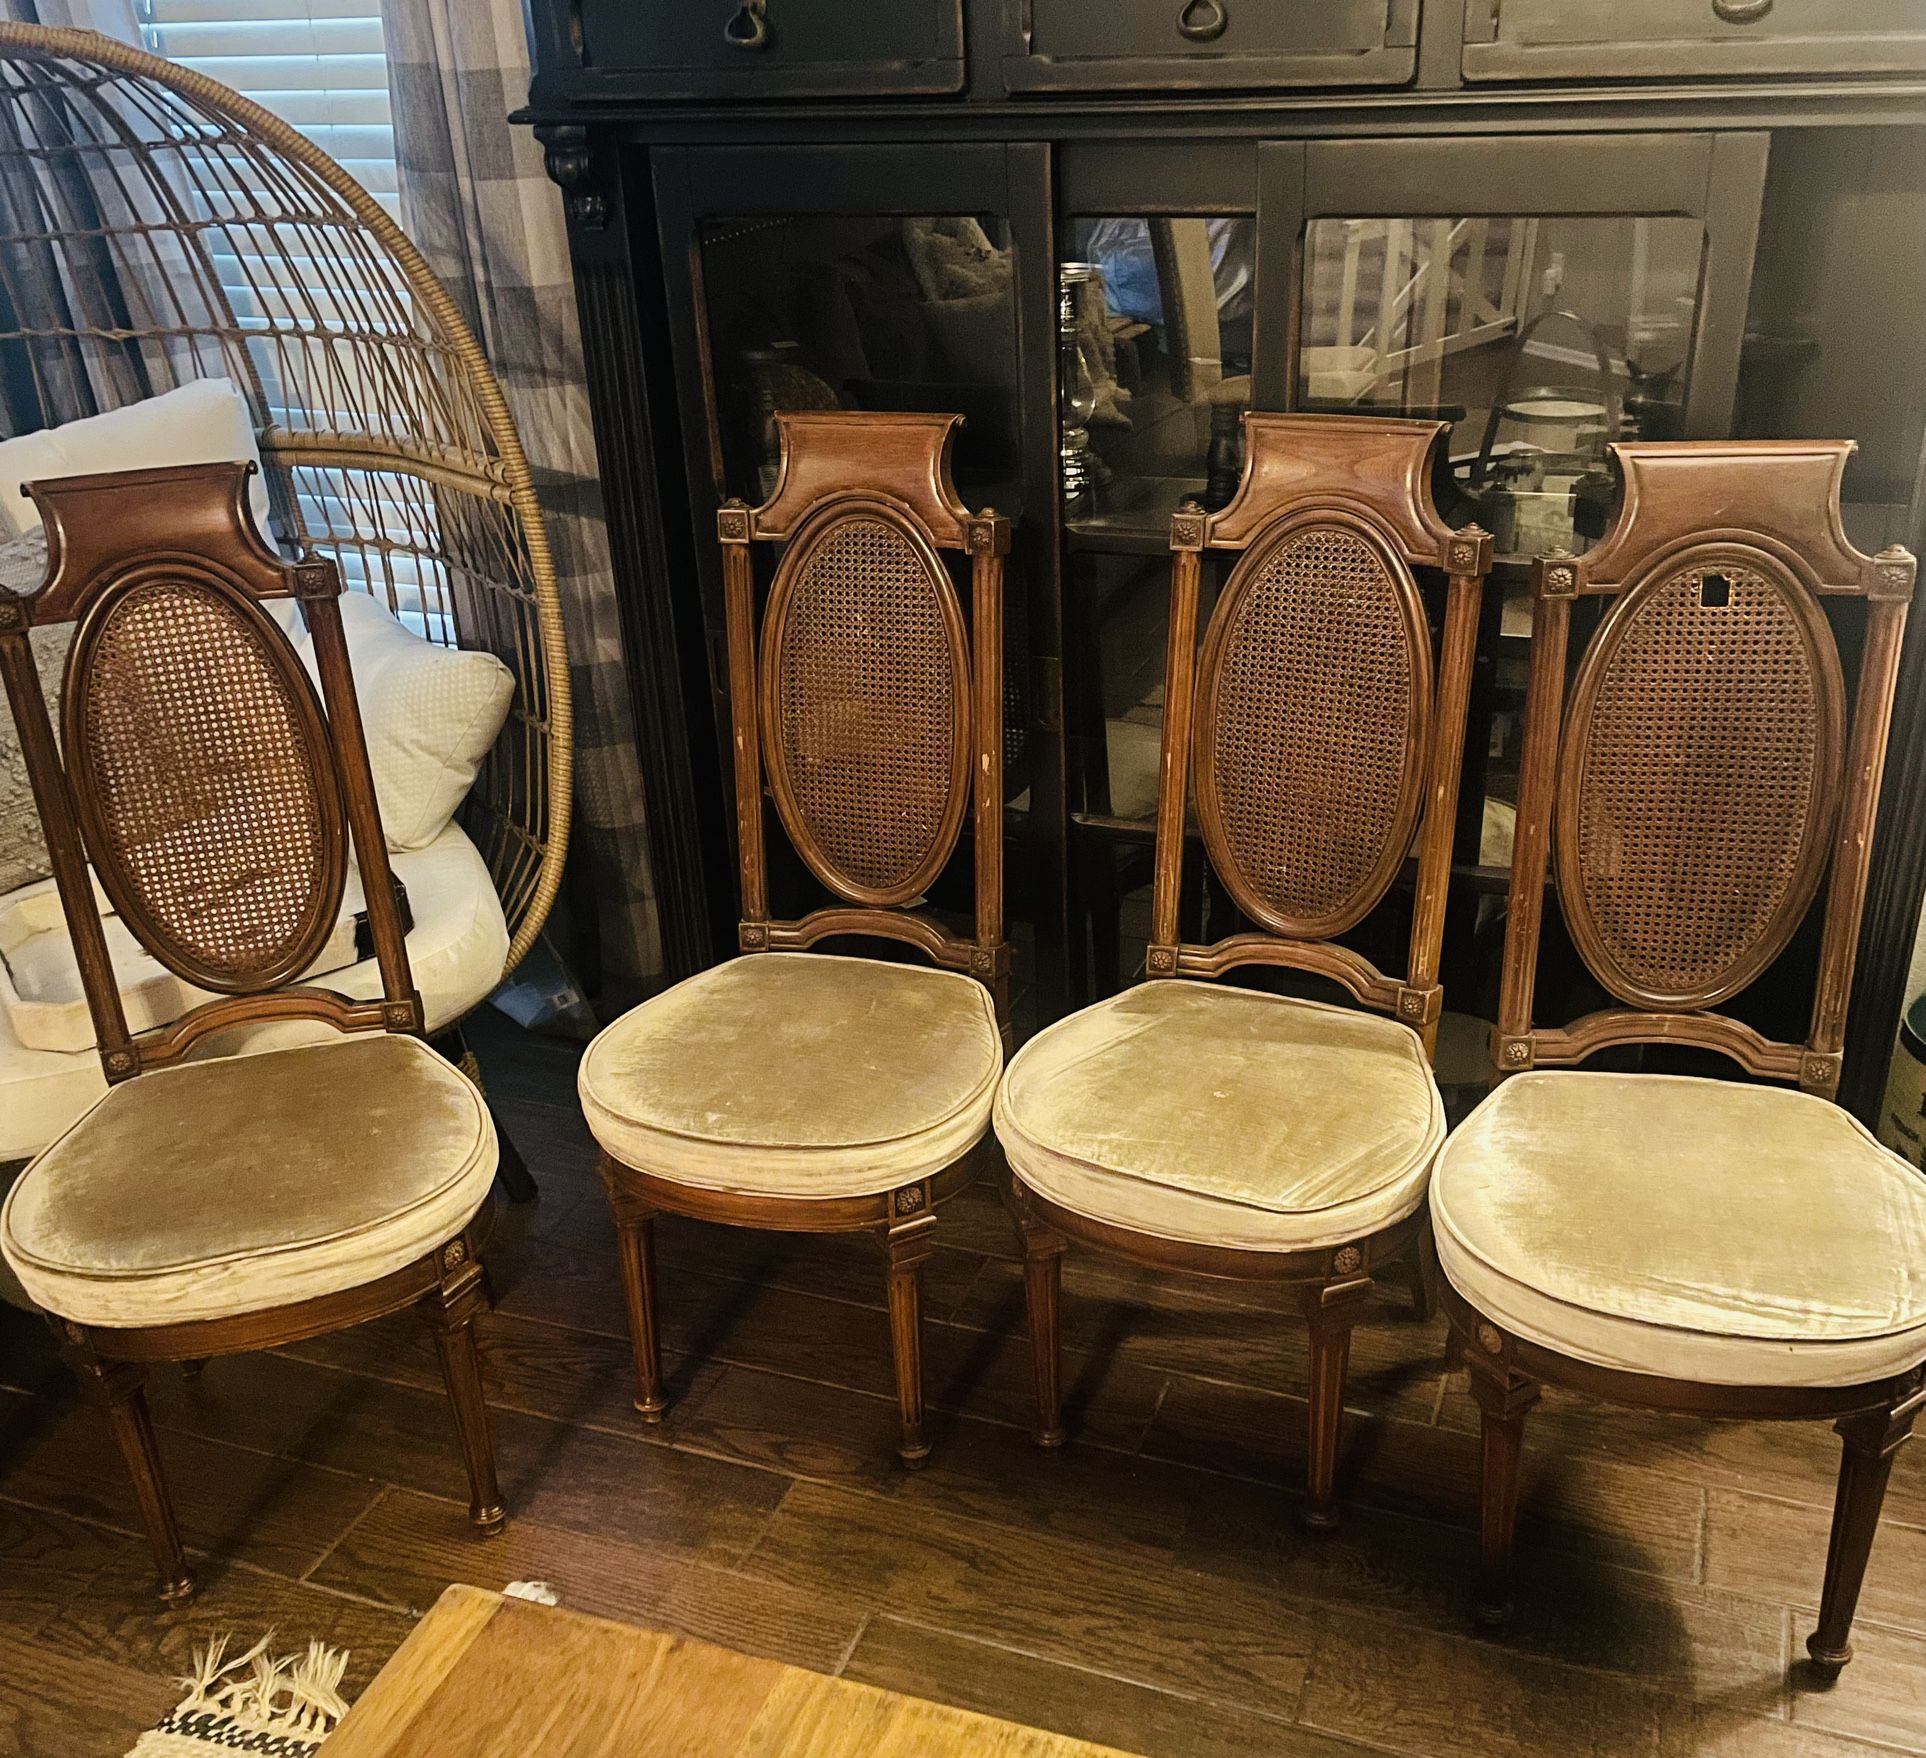 Free Vintage Chairs 